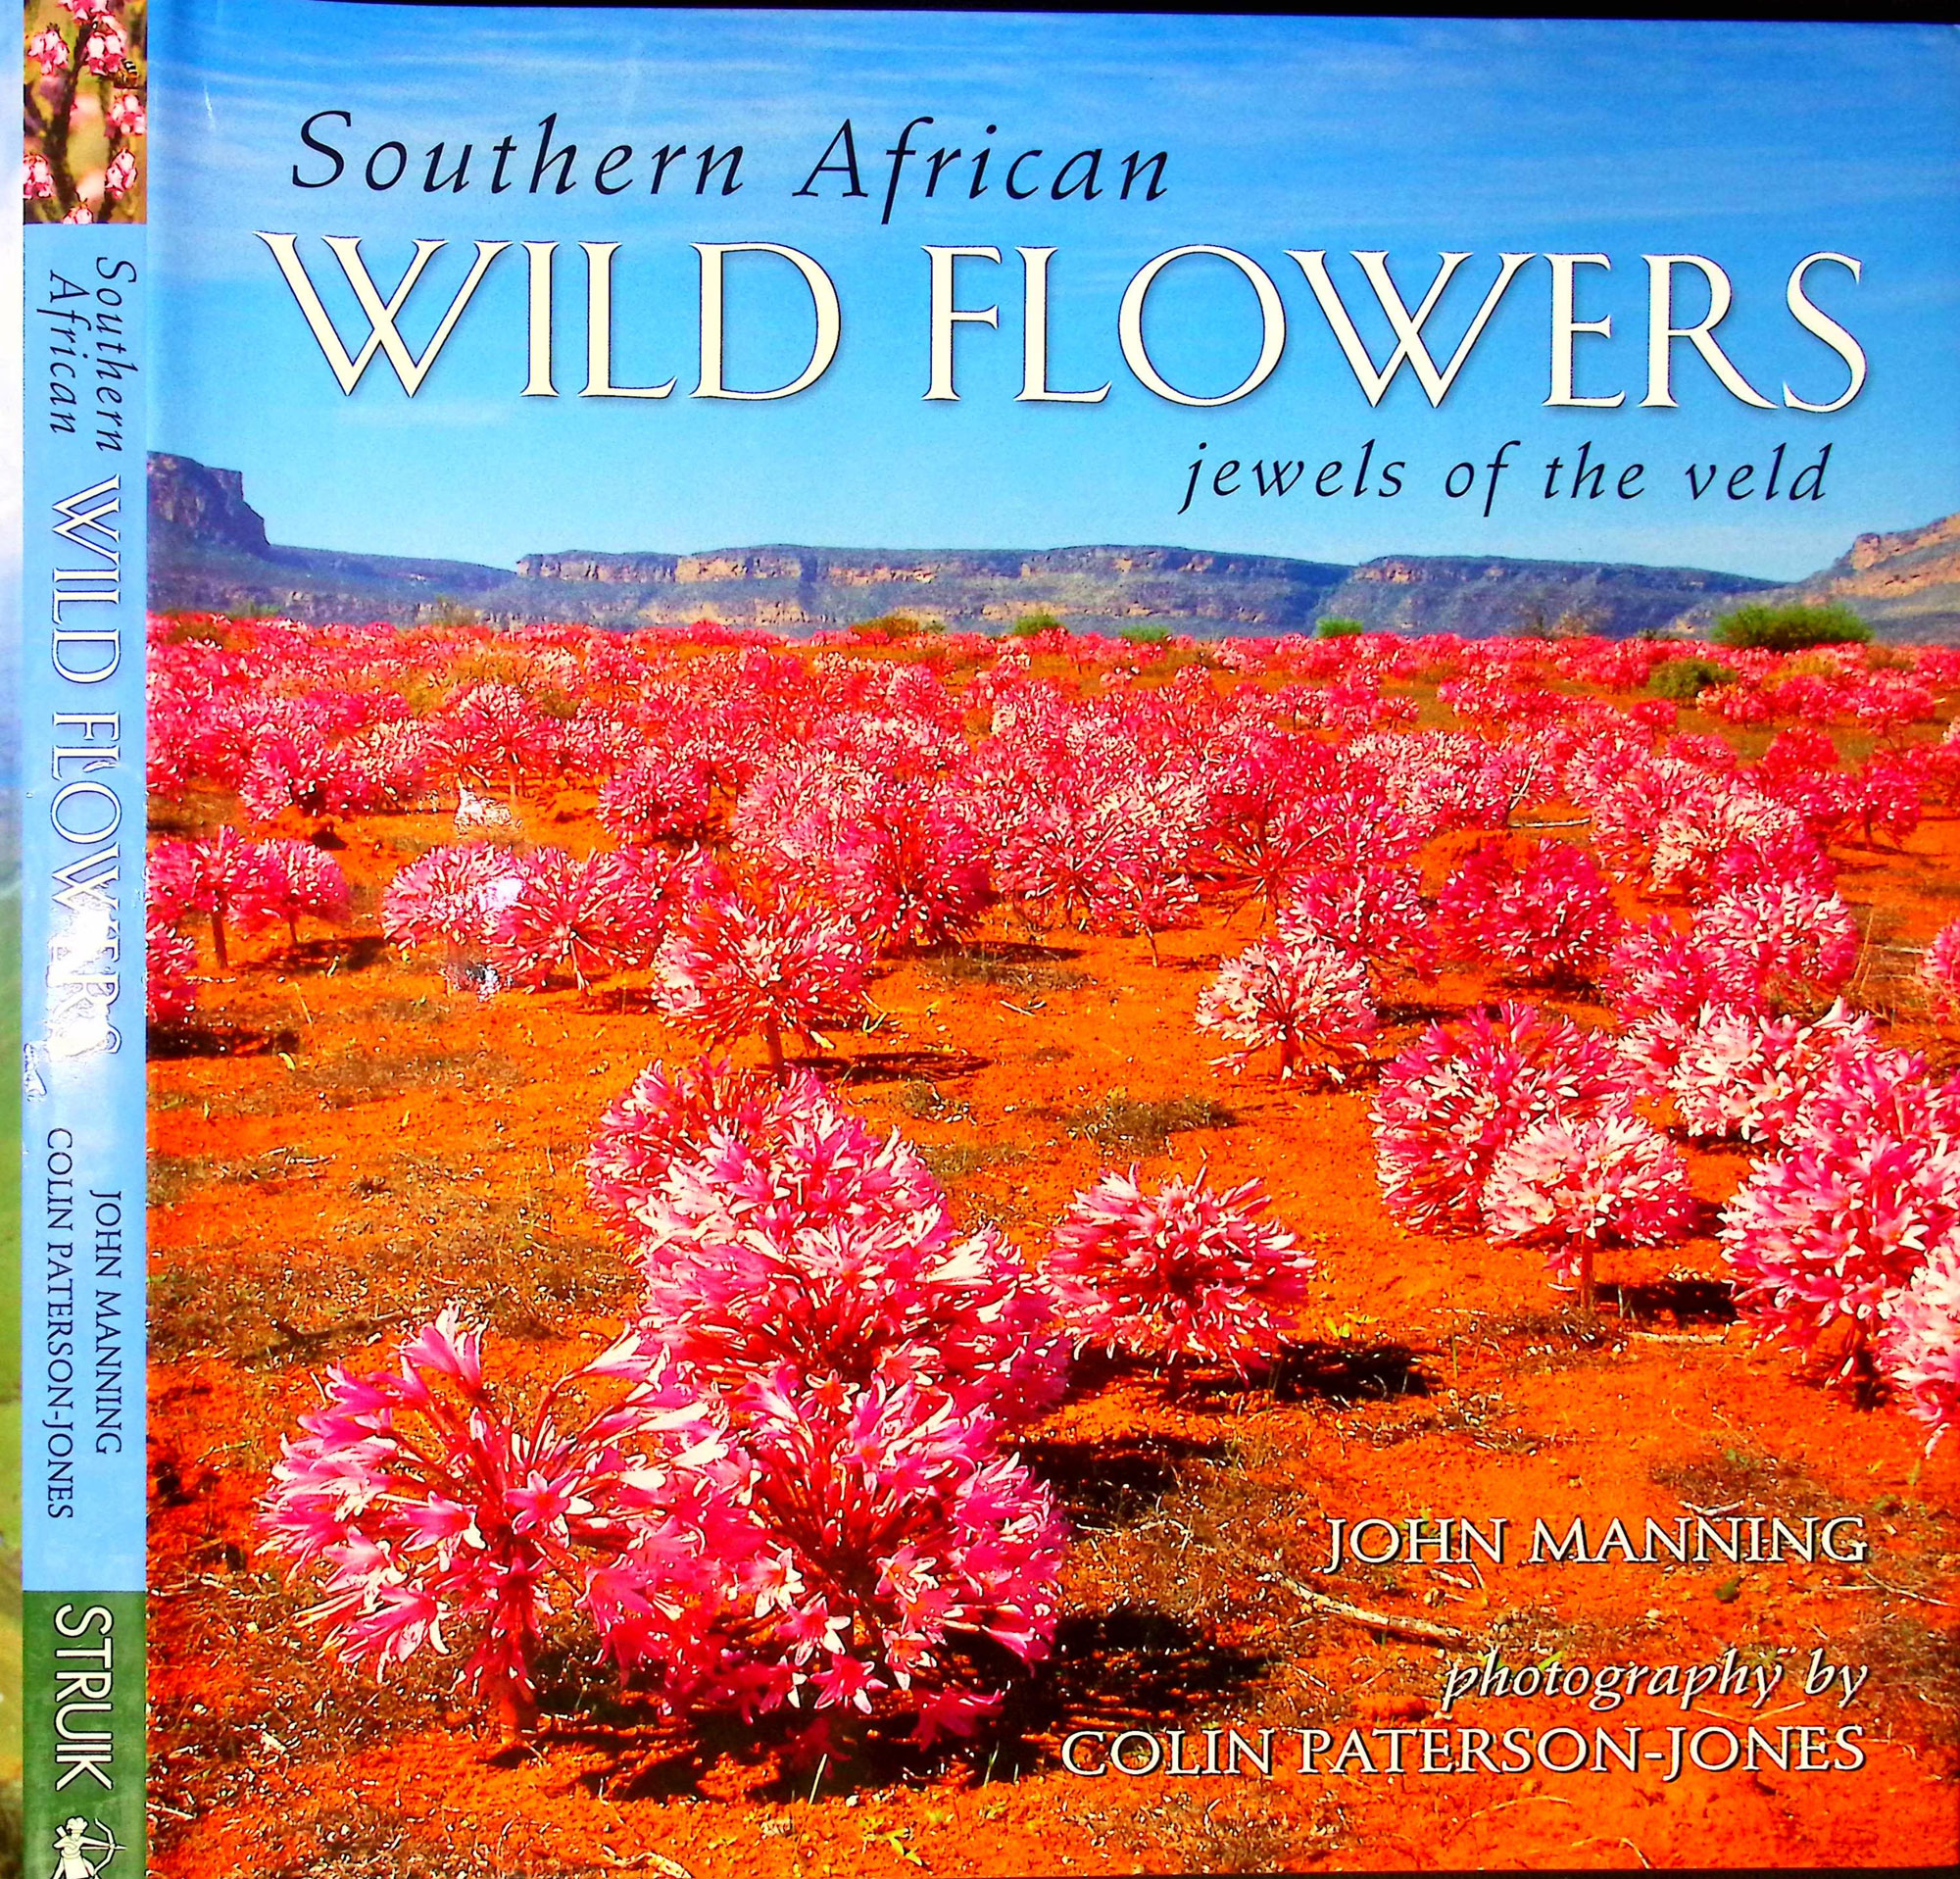 Southern African Wild Flowers. Jewels of the Veld.